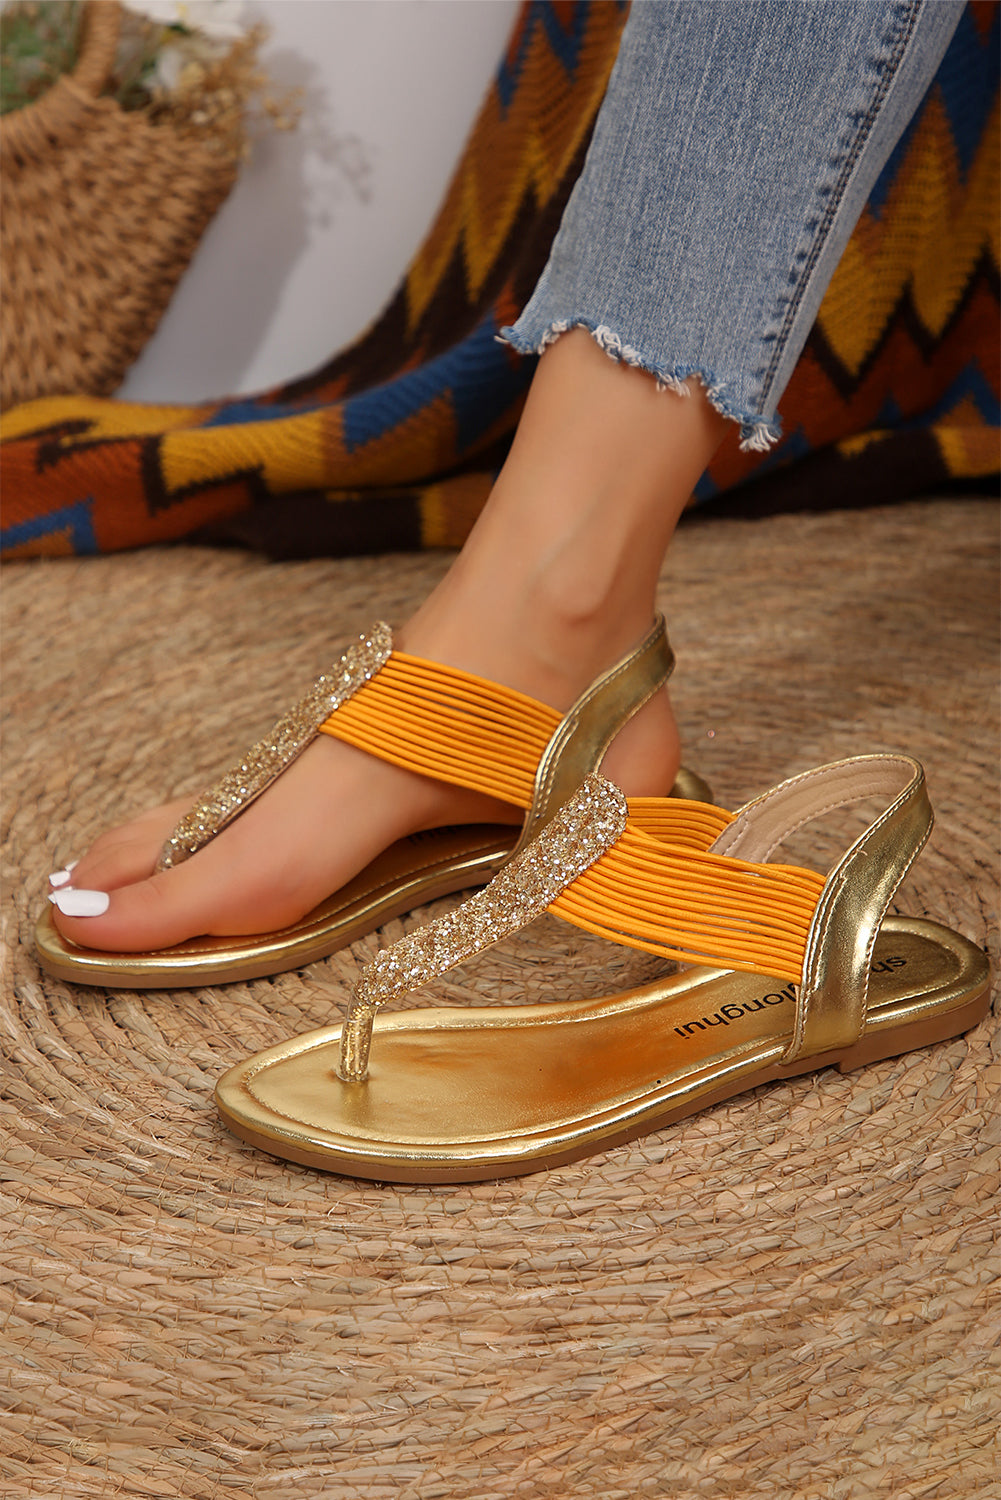 Chestnut Sequined Leathered Clip Toe Flat Sandals